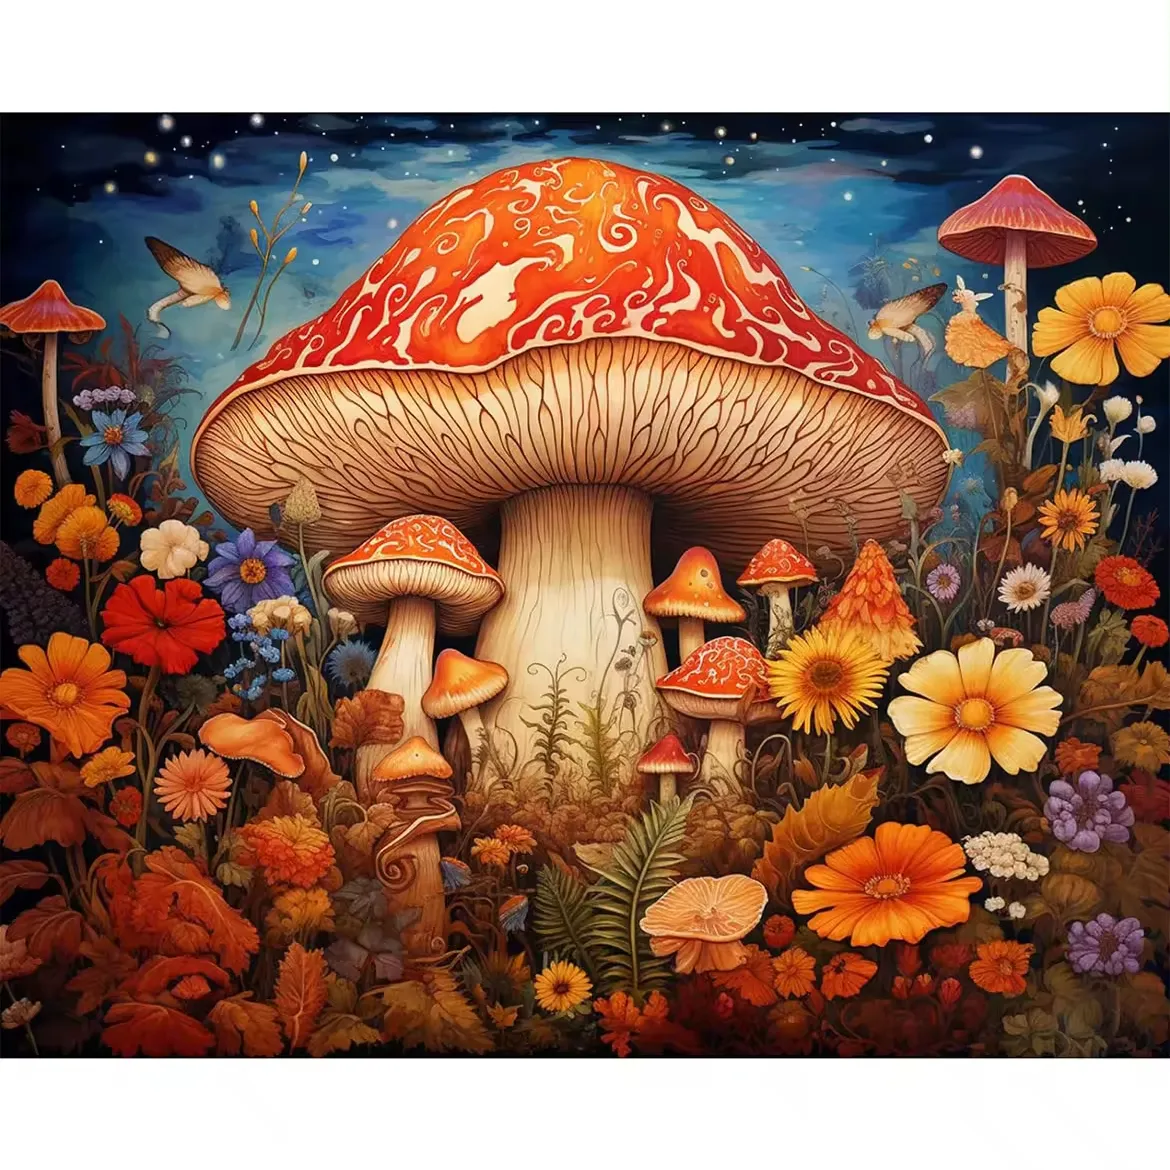 Painting By Number Kit Botanicals Flower Bush Mushroom Heaven and Earth Frameless Beautiful Atmosphere Home Decorative Painting